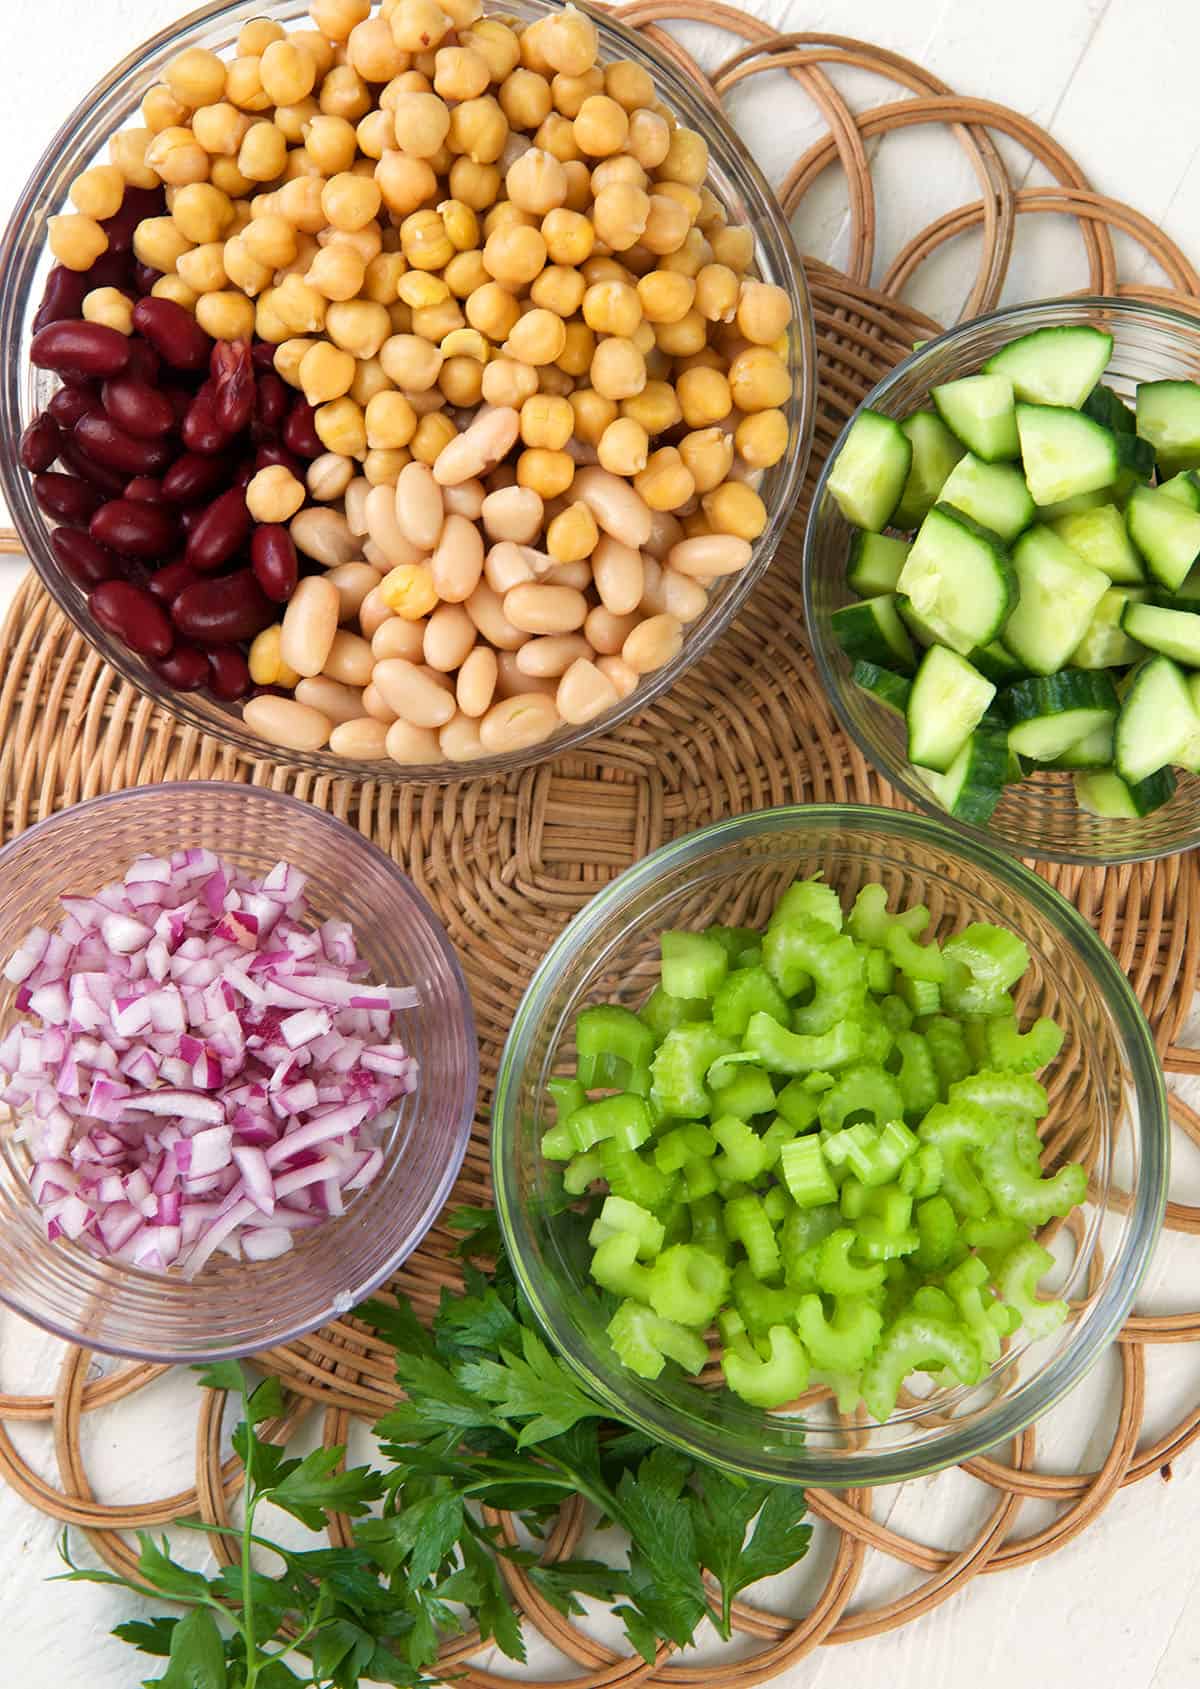 Ingredients for three bean salad are spread on a place mat. 